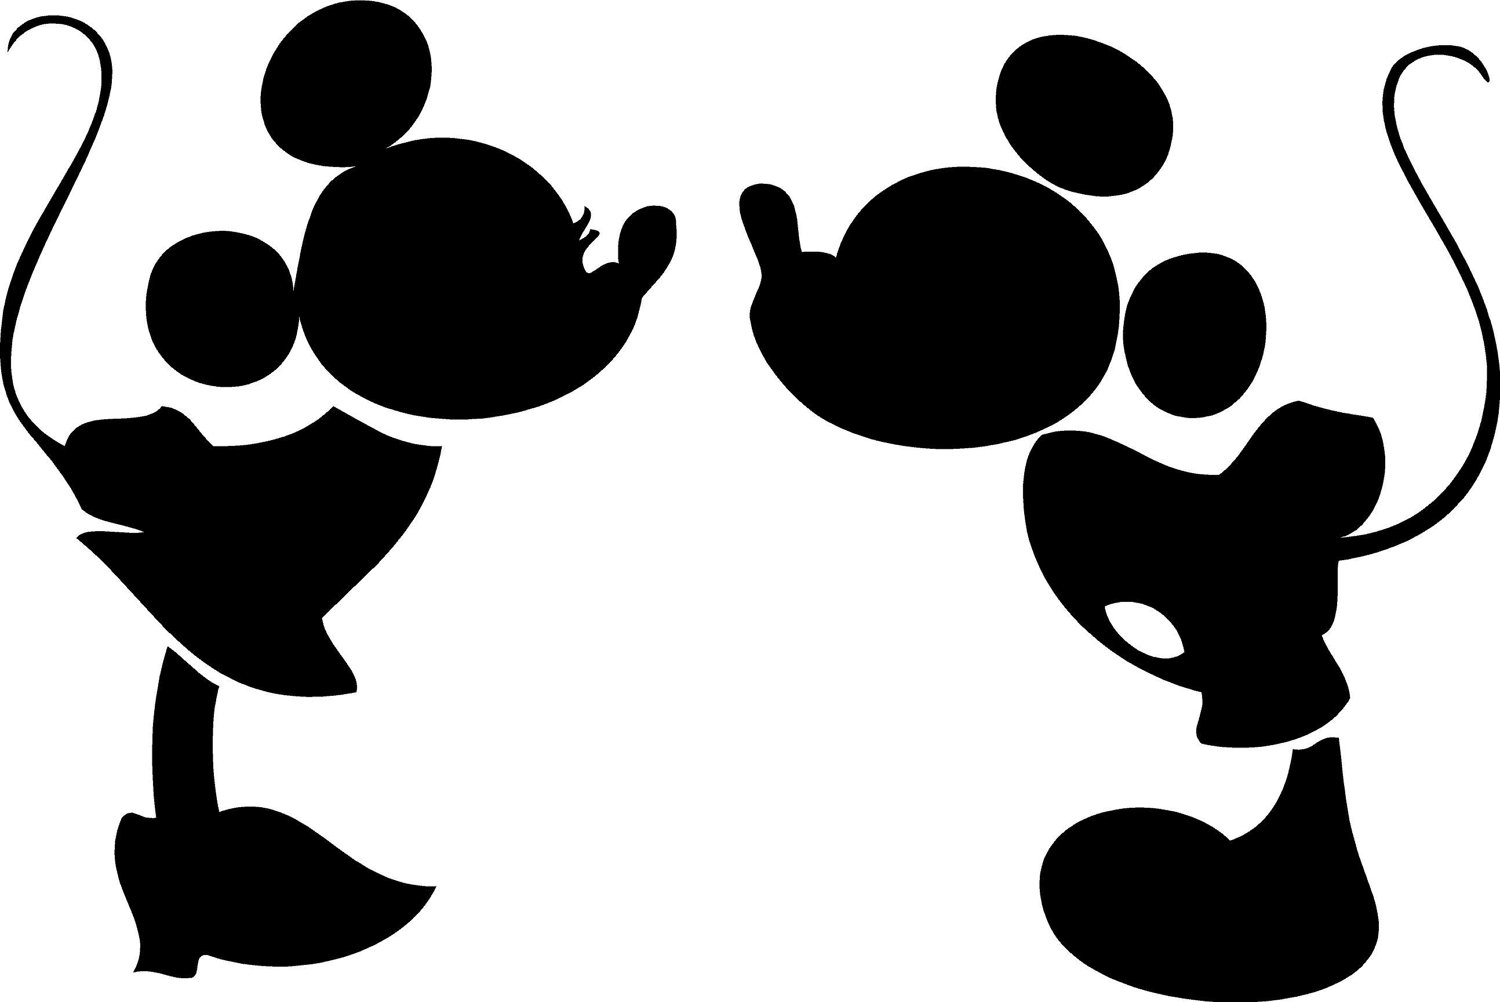 disney silhouette on Clipart library | Disney Silhouettes, Silhouette 